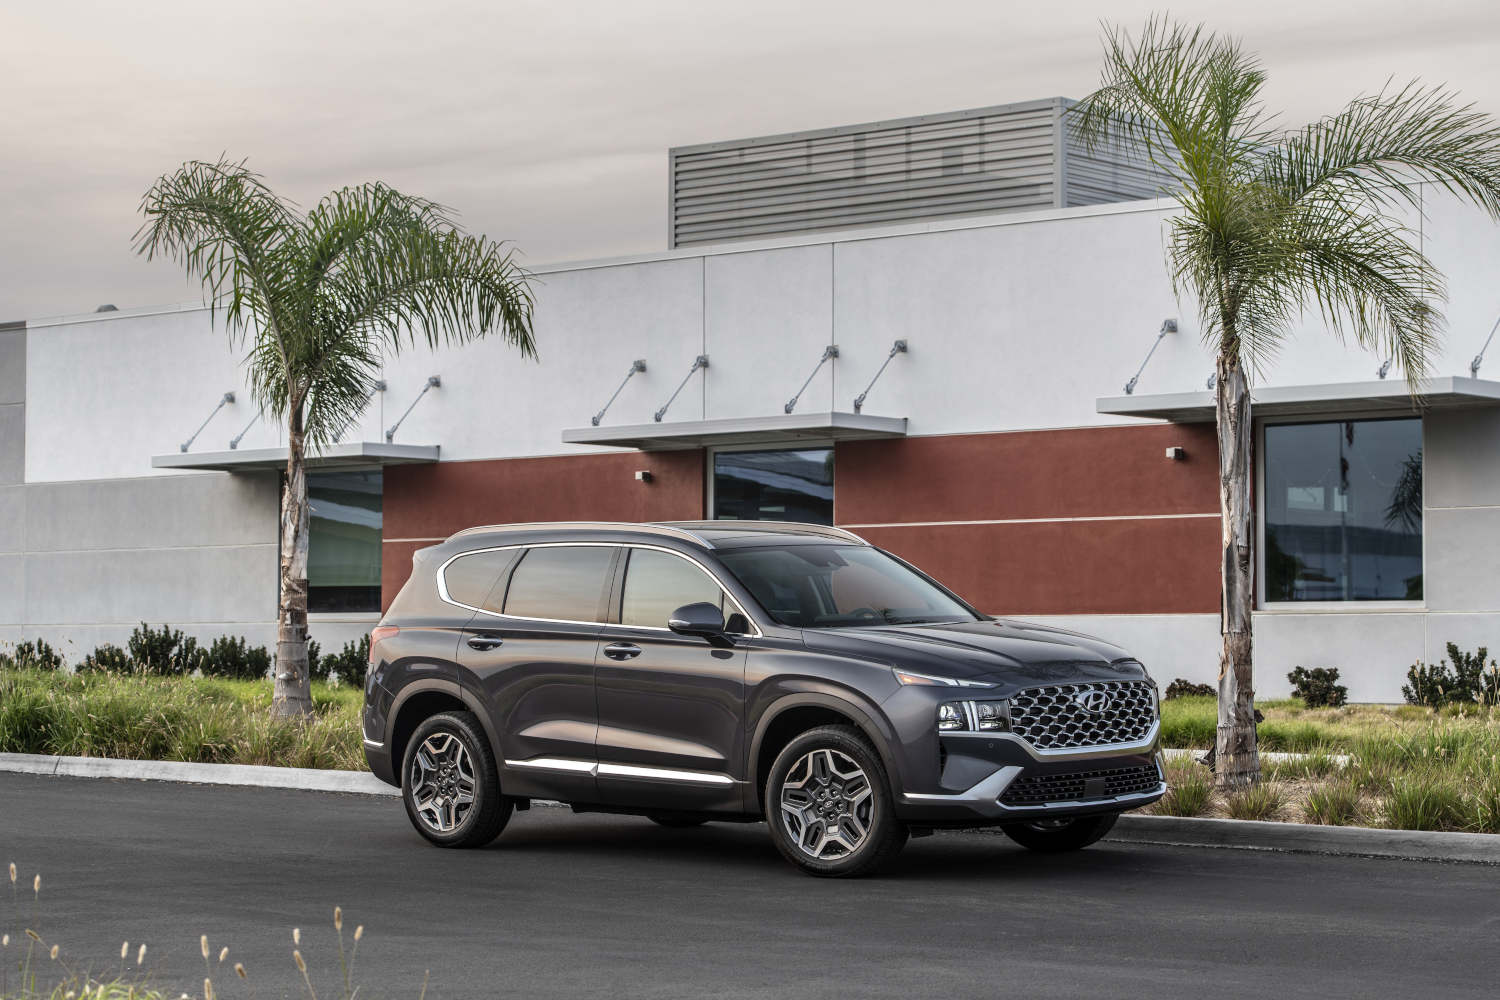 The 2023 Hyundai Santa Fe is another one of the best SUVs for the money